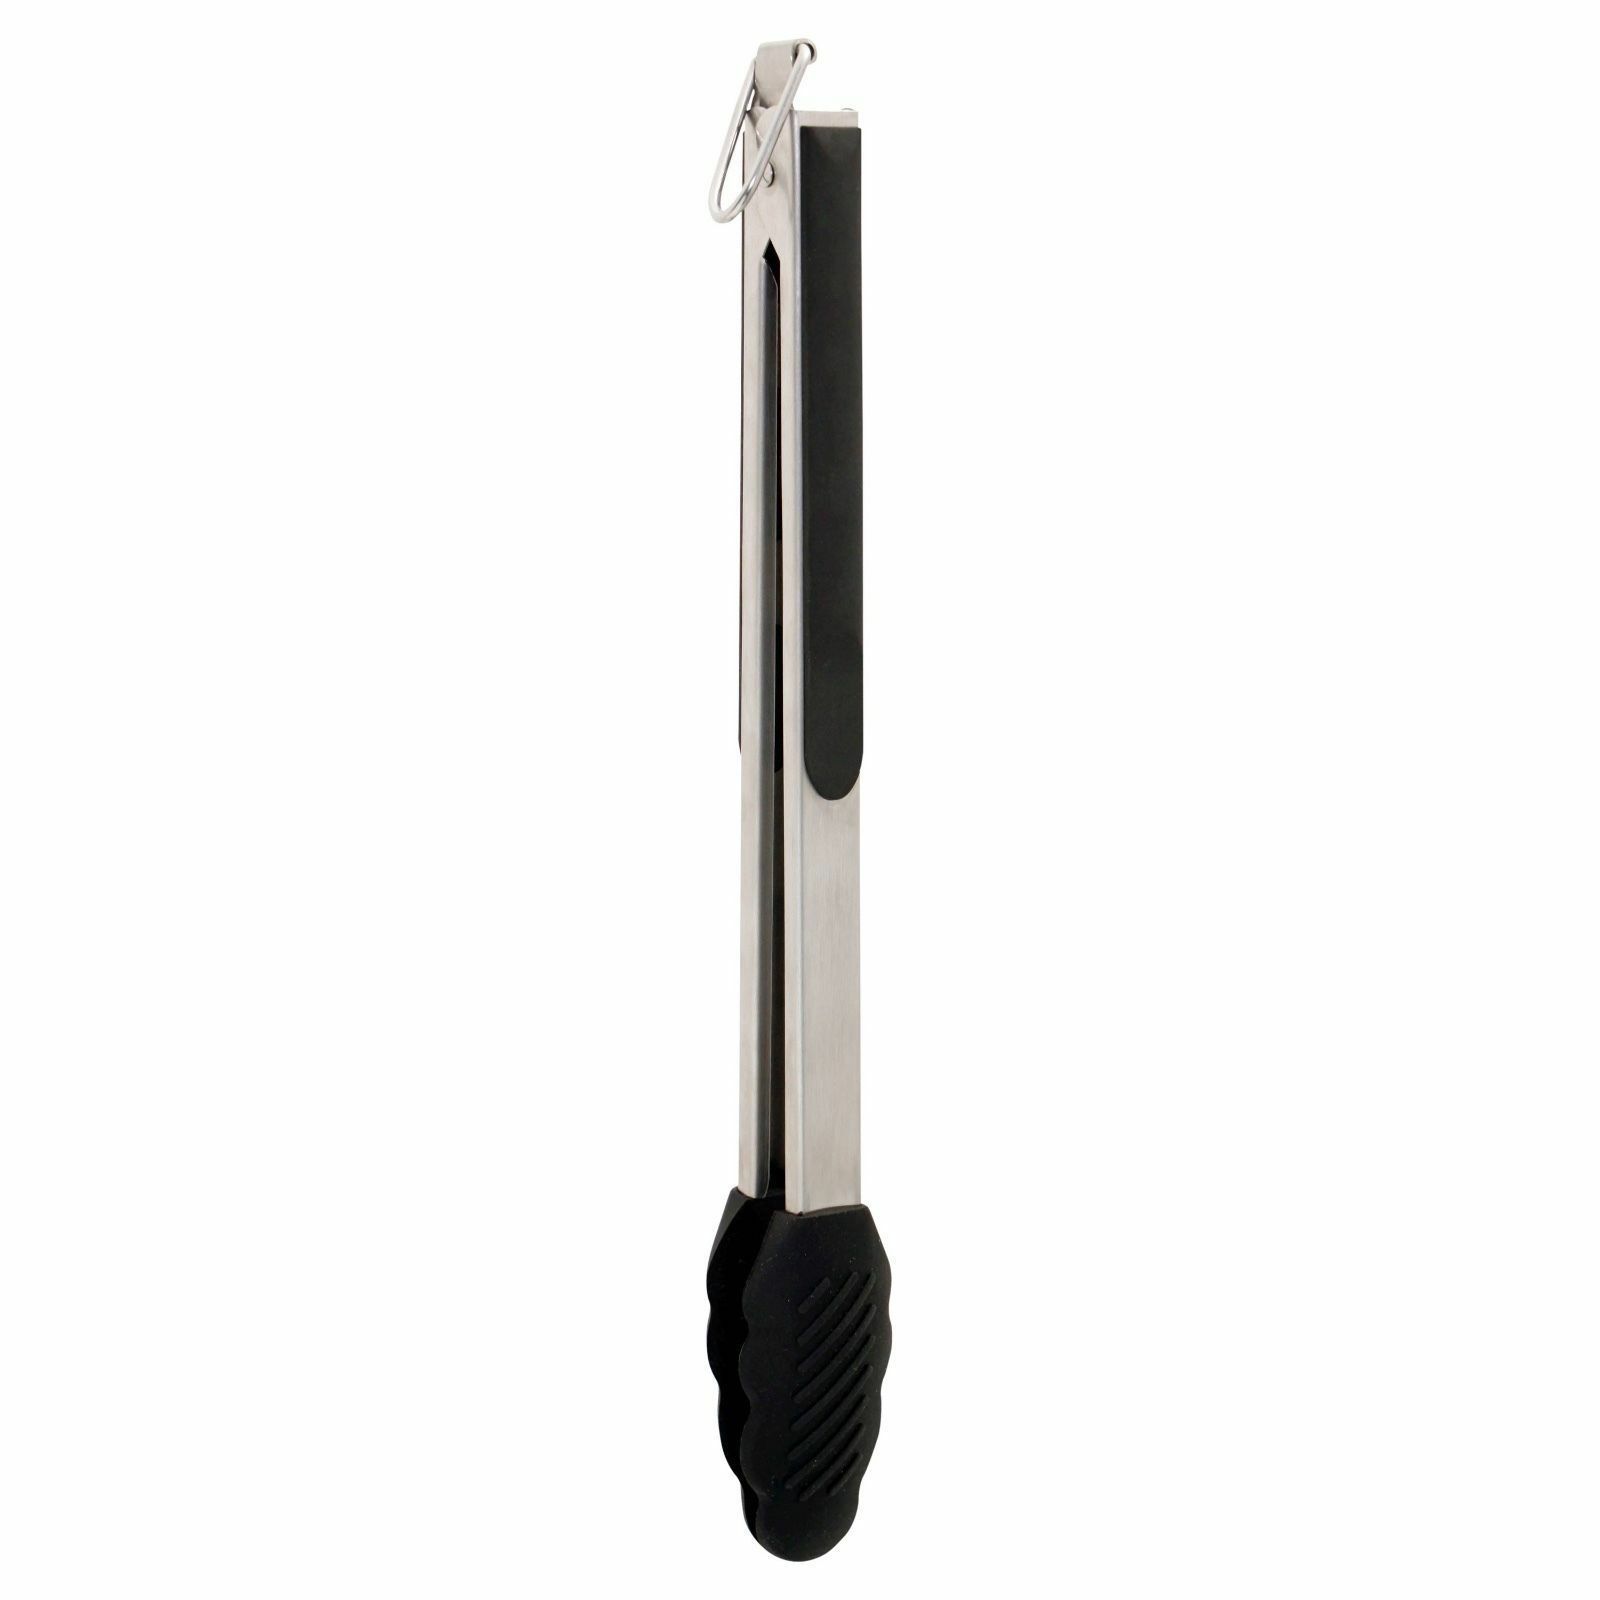 New 13" Stainless Steel Locking Tongs Black Silicone Tips Room Essentials CHEAP - £4.61 GBP - £7.70 GBP